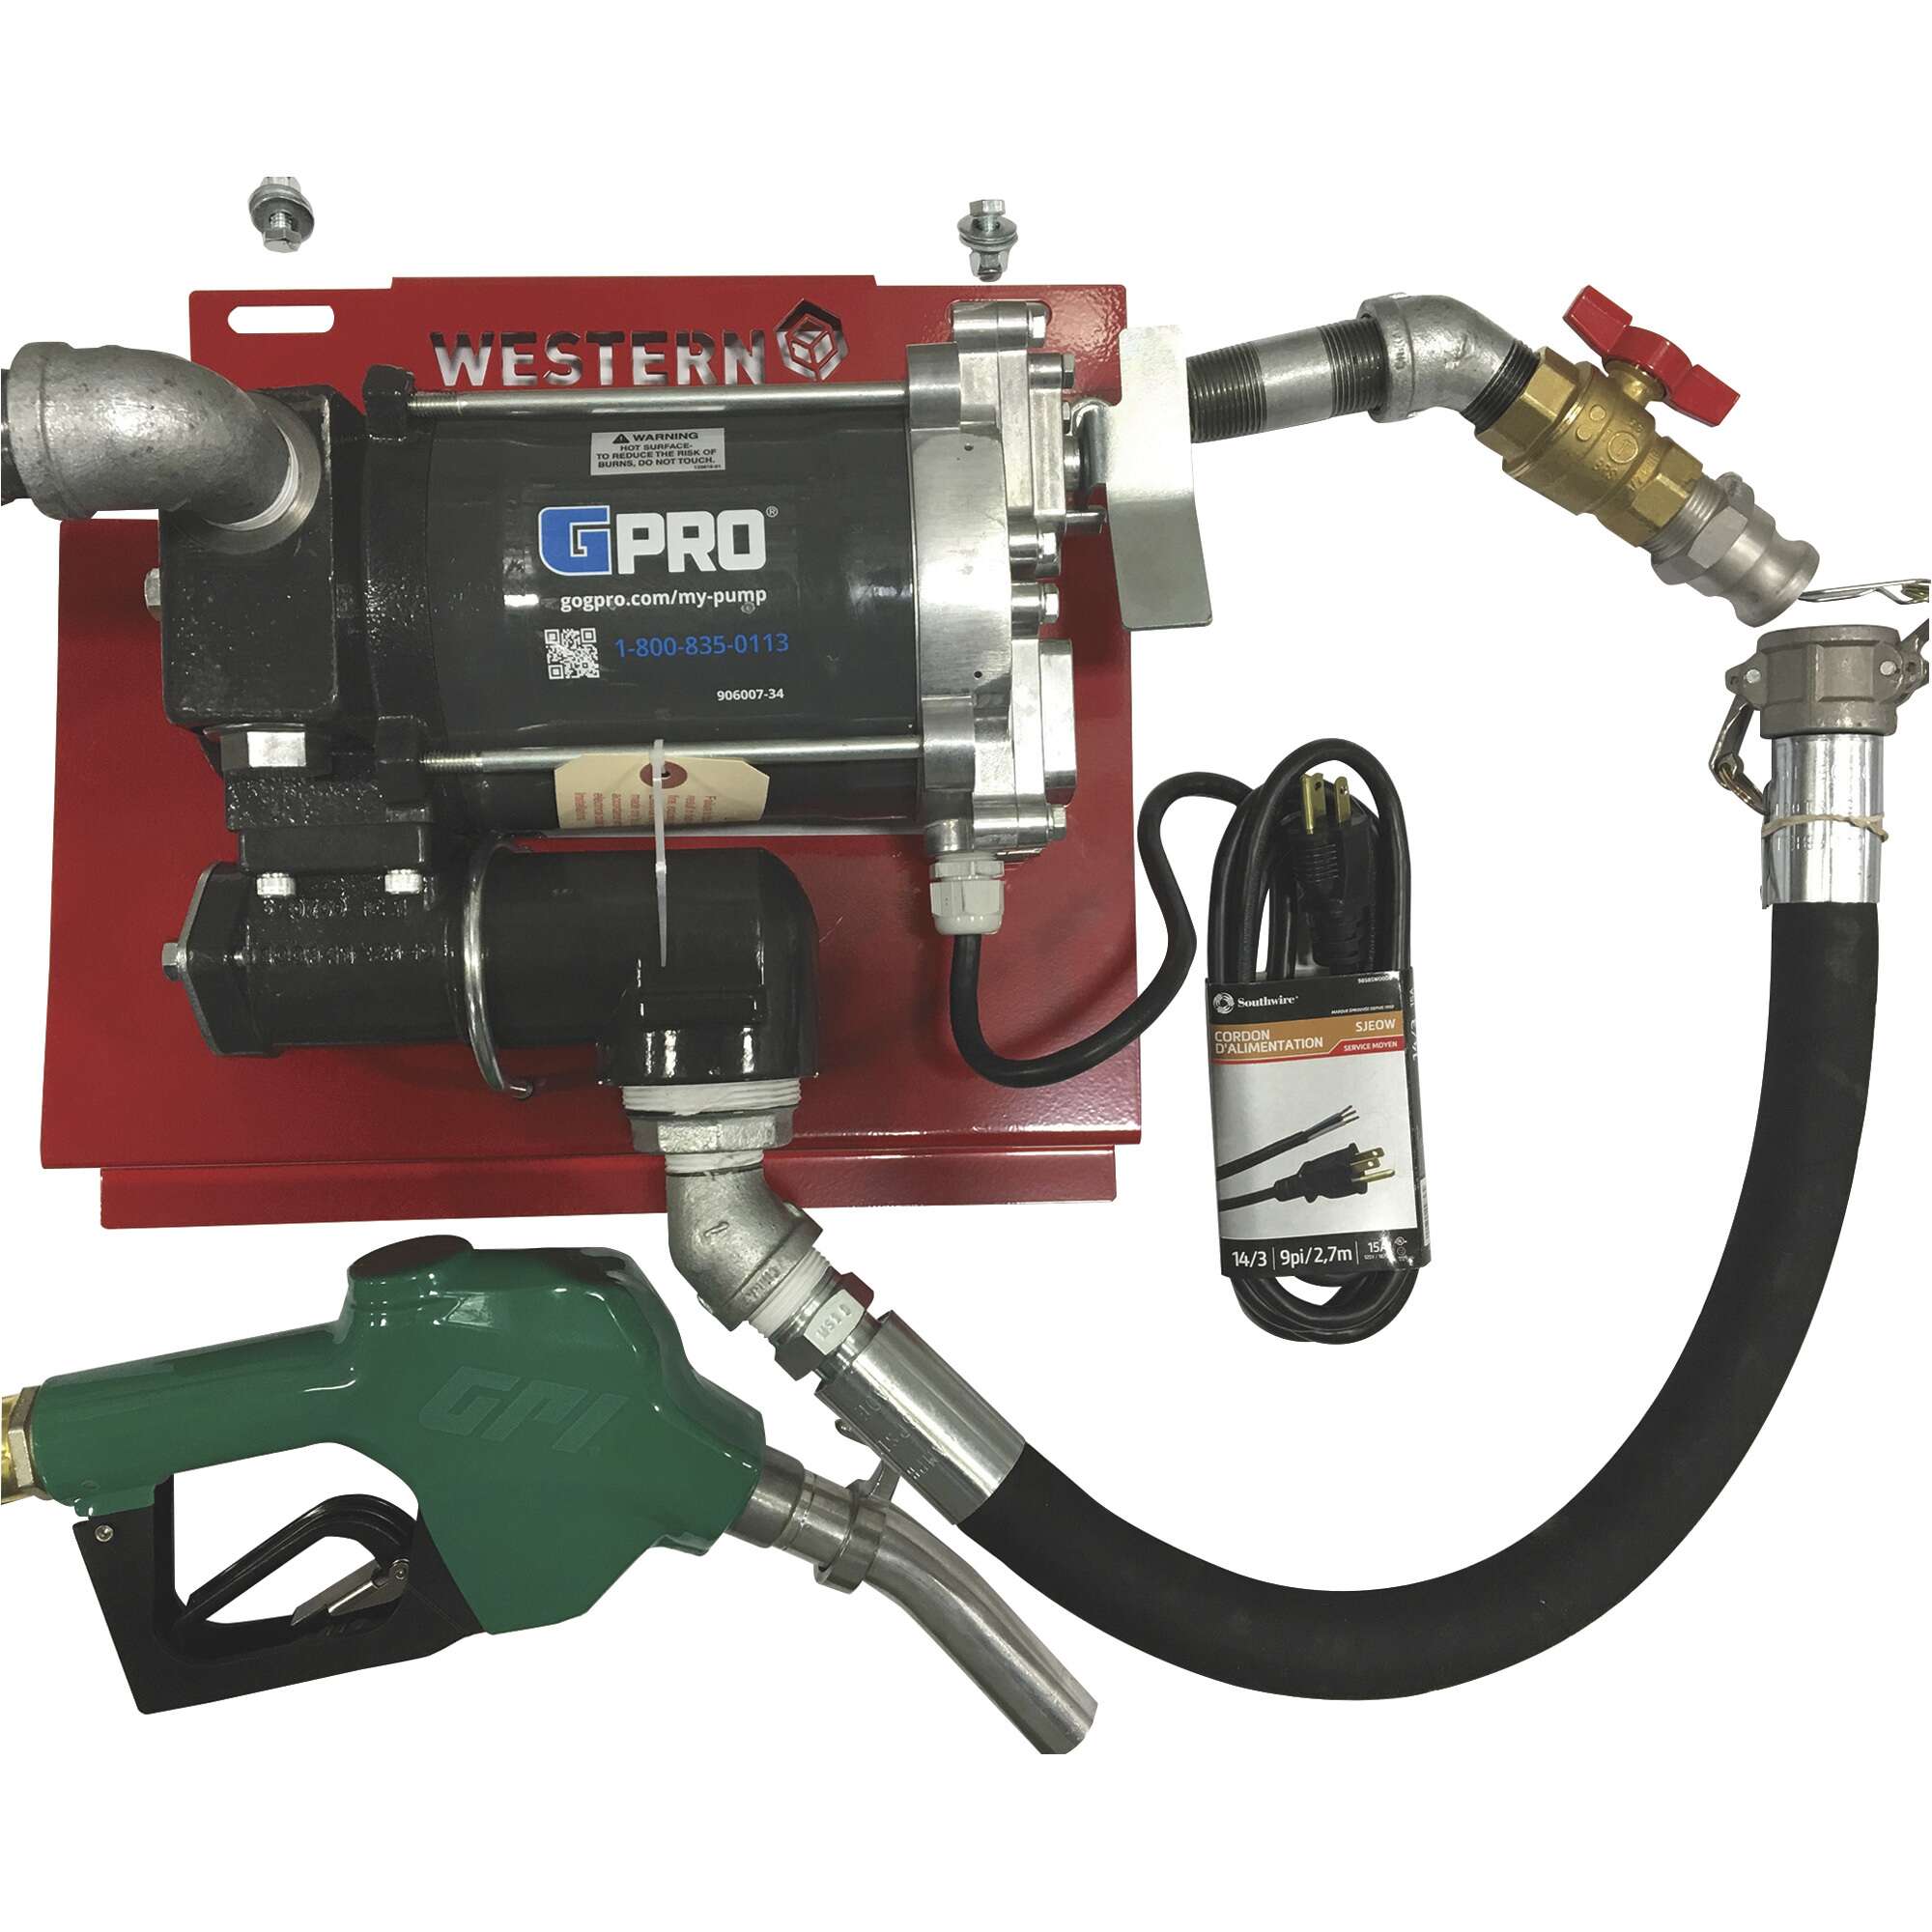 Western Global Deluxe Fuel Transfer Pump Kit 115 Volt AC 20 GPM